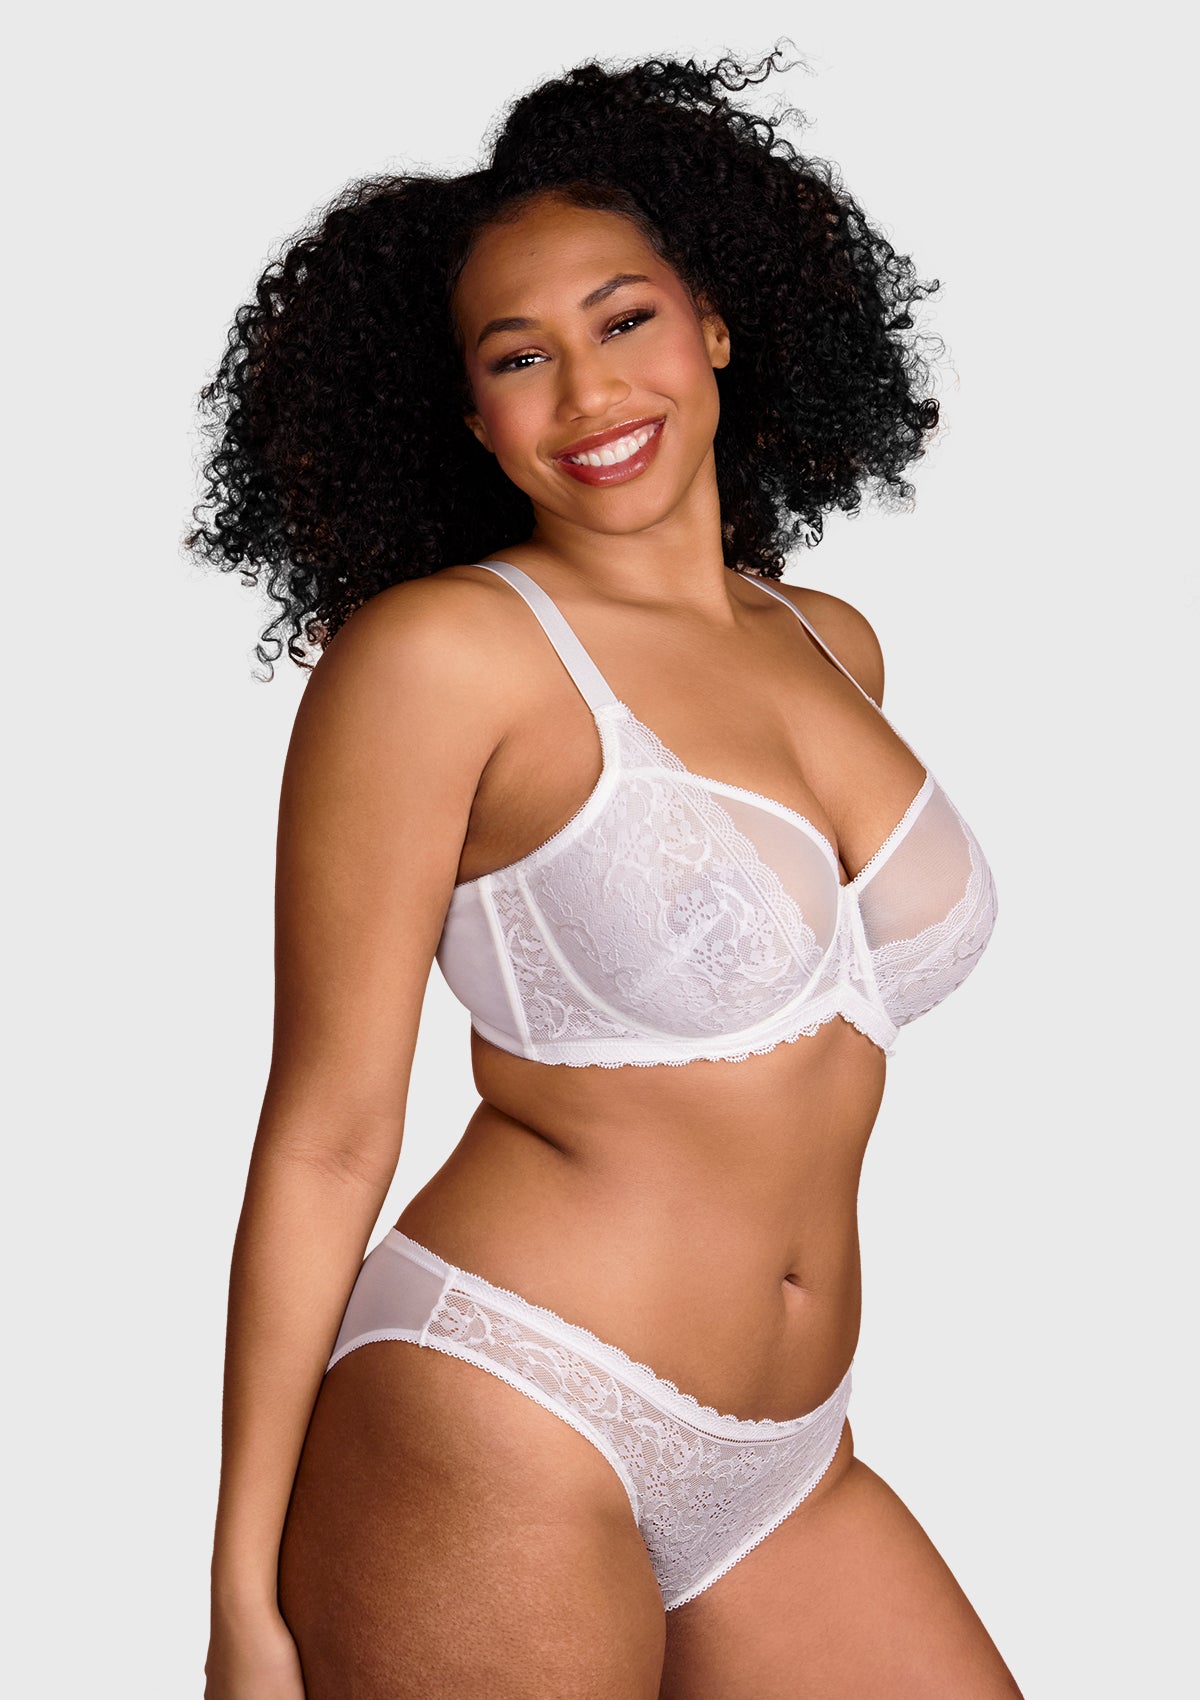 HSIA Anemone Big Bra: Best Bra For Lift And Support, Floral Bra - Black / 42 / D